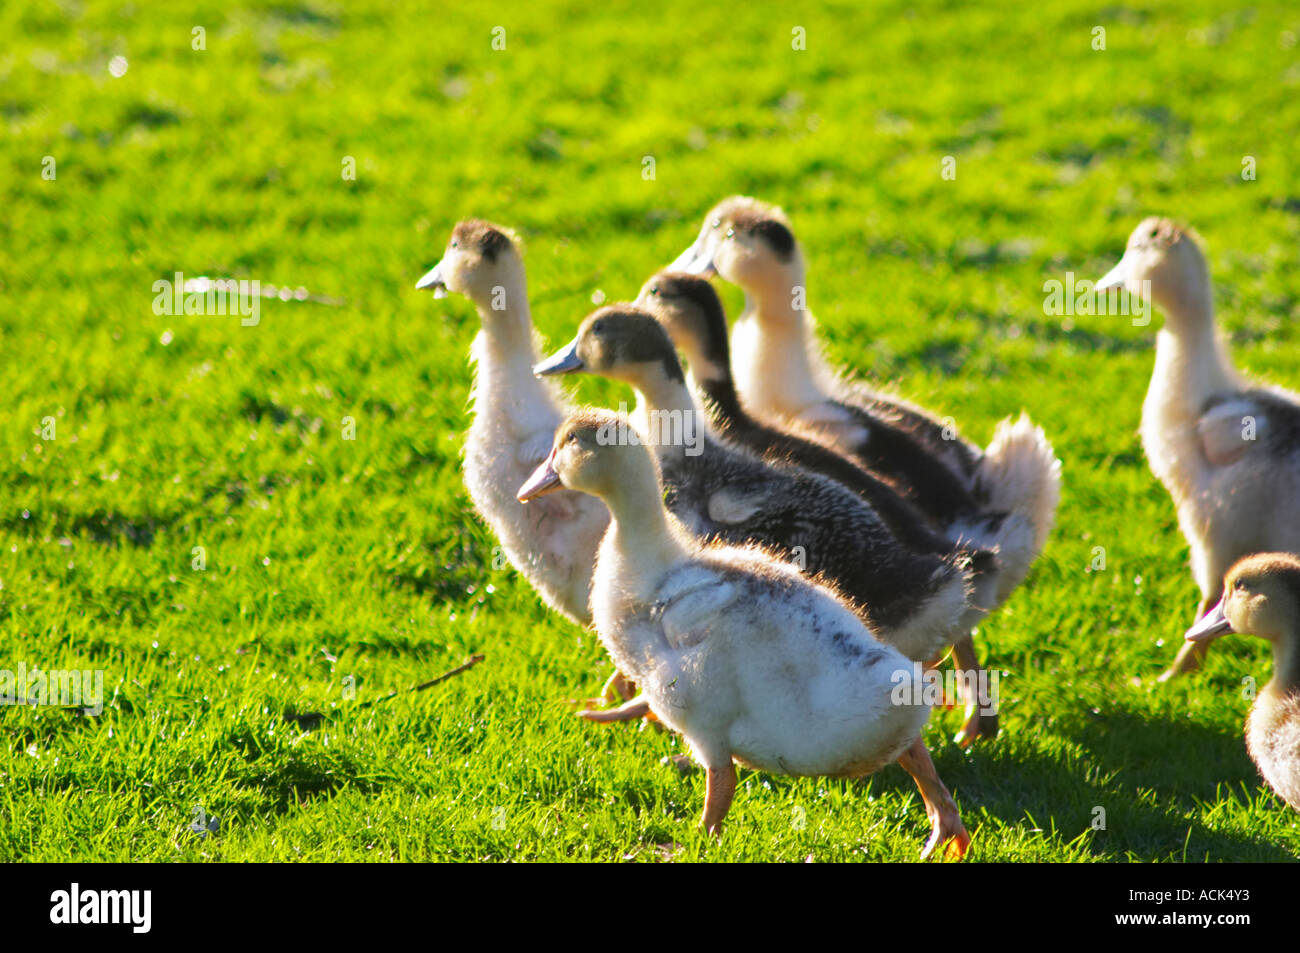 White and black ducks at a duck farm, kept outdoors for grazing before the final force feeding stage to make foie gras duck's liver. Ferme de Biorne duck and fowl farm Dordogne France Stock Photo